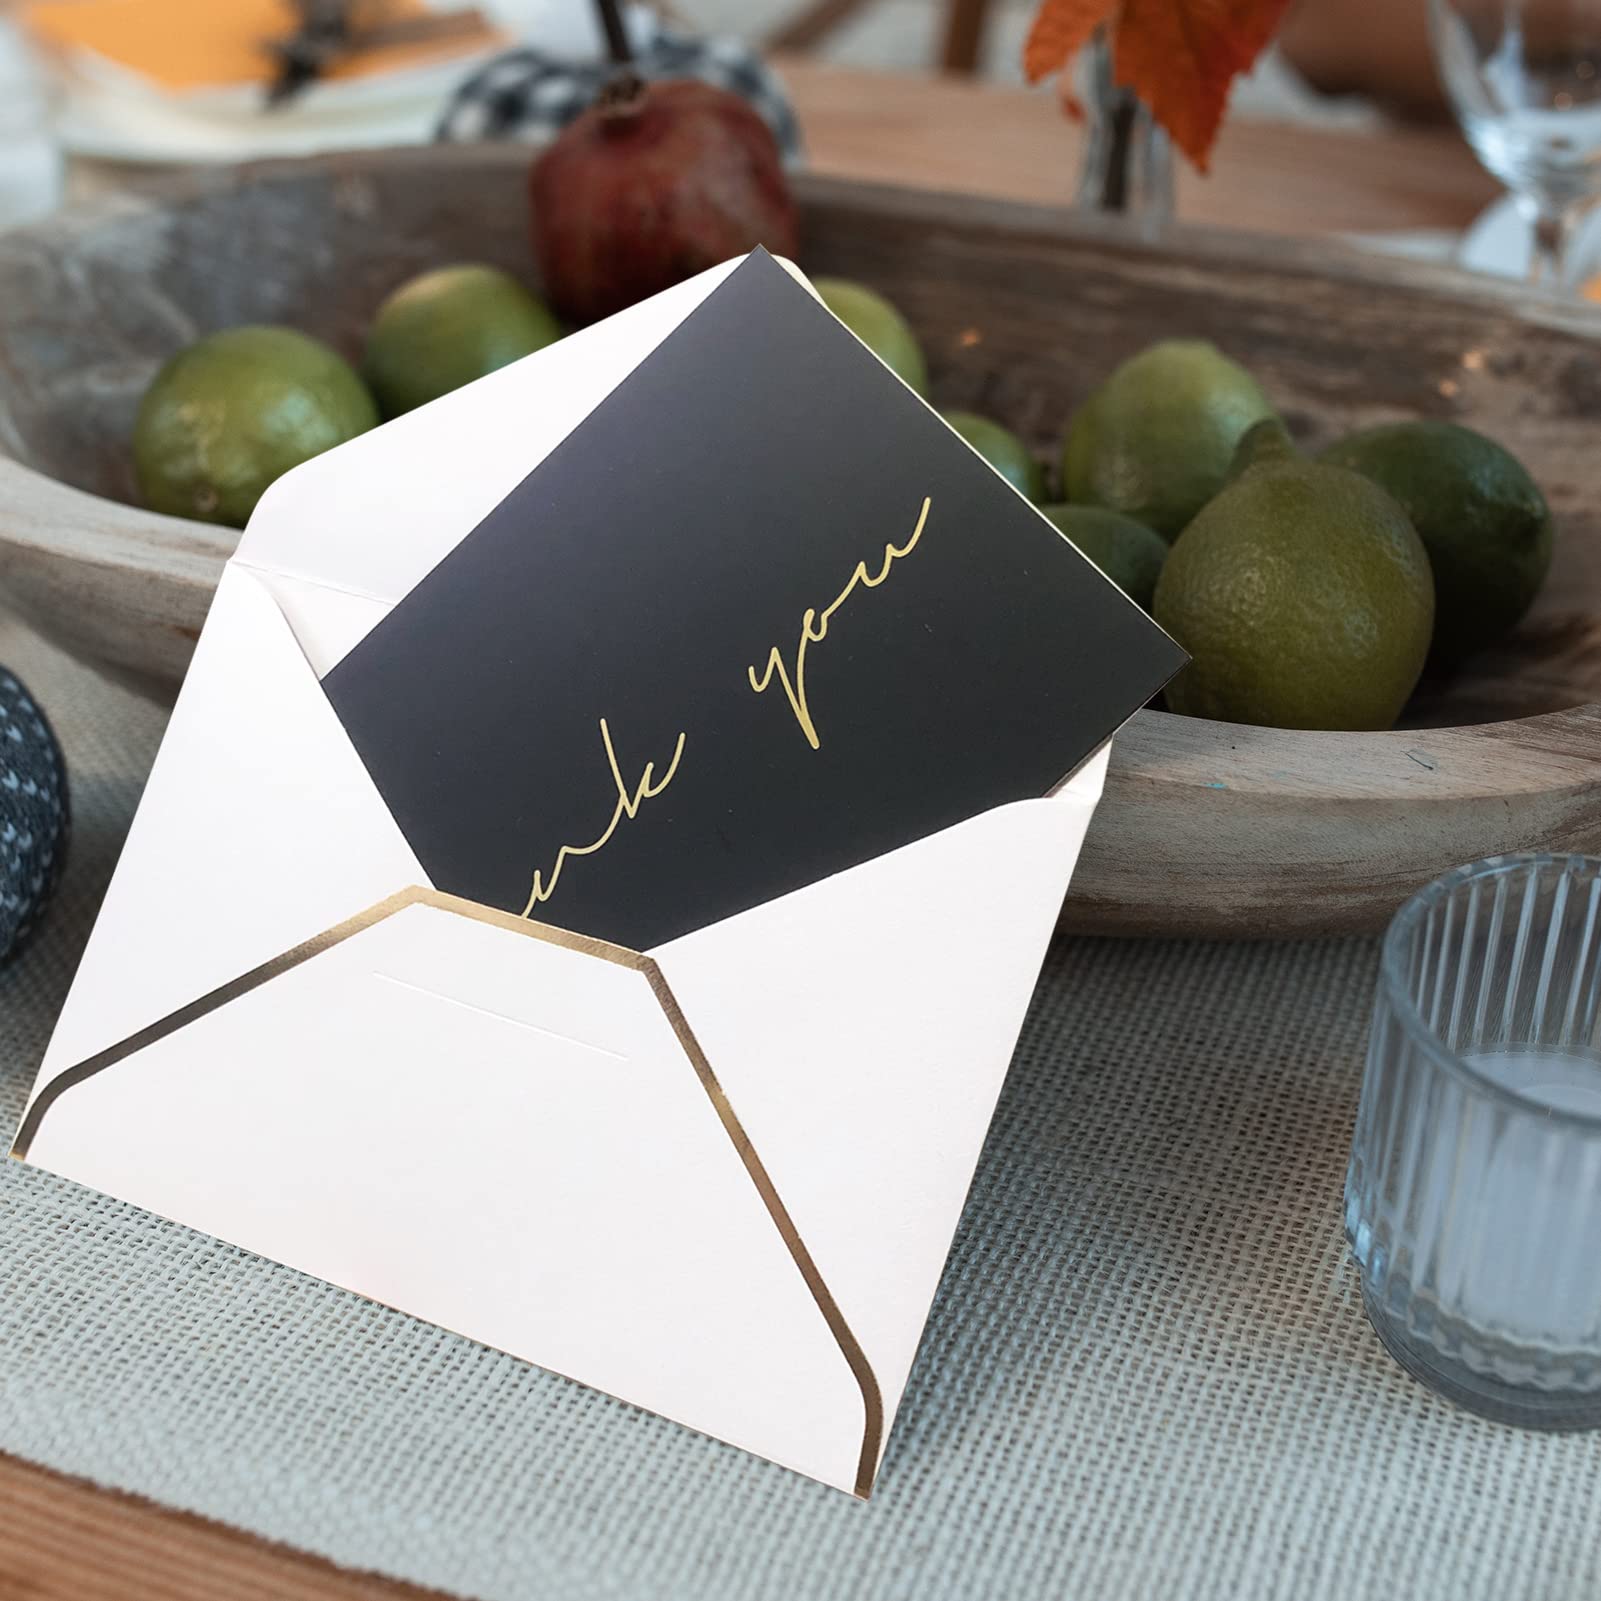 40 Thank You Cards, Black and Gold Foil Thank You Cards Bulk, All Occasions Thank You Note Card with Envelopes & Stickers, Wrapped with Sturdy Box, Great for Wedding, Baby Shower, Bridal Shower, Etc -